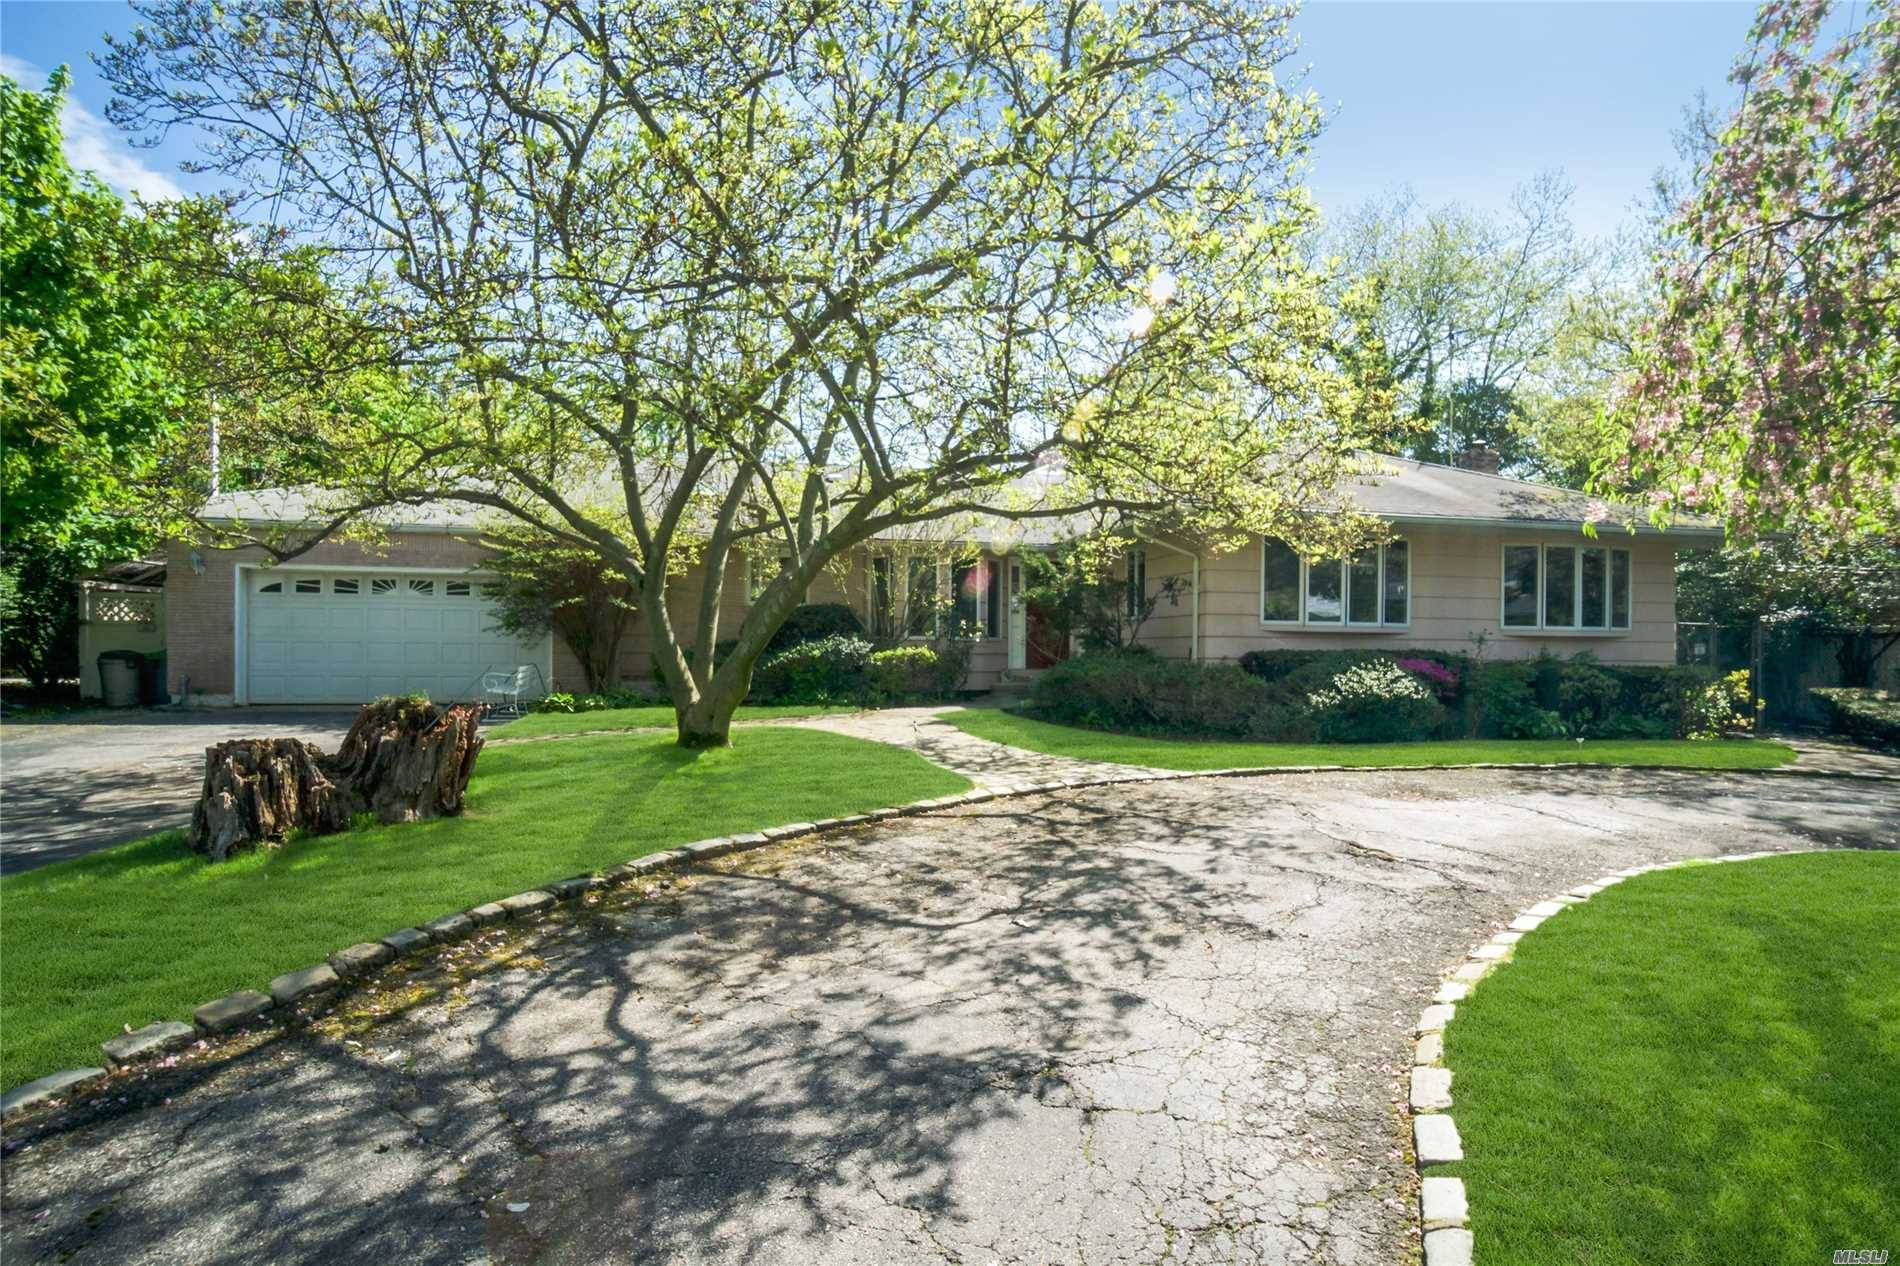 Beautiful Redone Sprawling Ranch In A Hidden Winding Street In The Heart Of Woodmere.